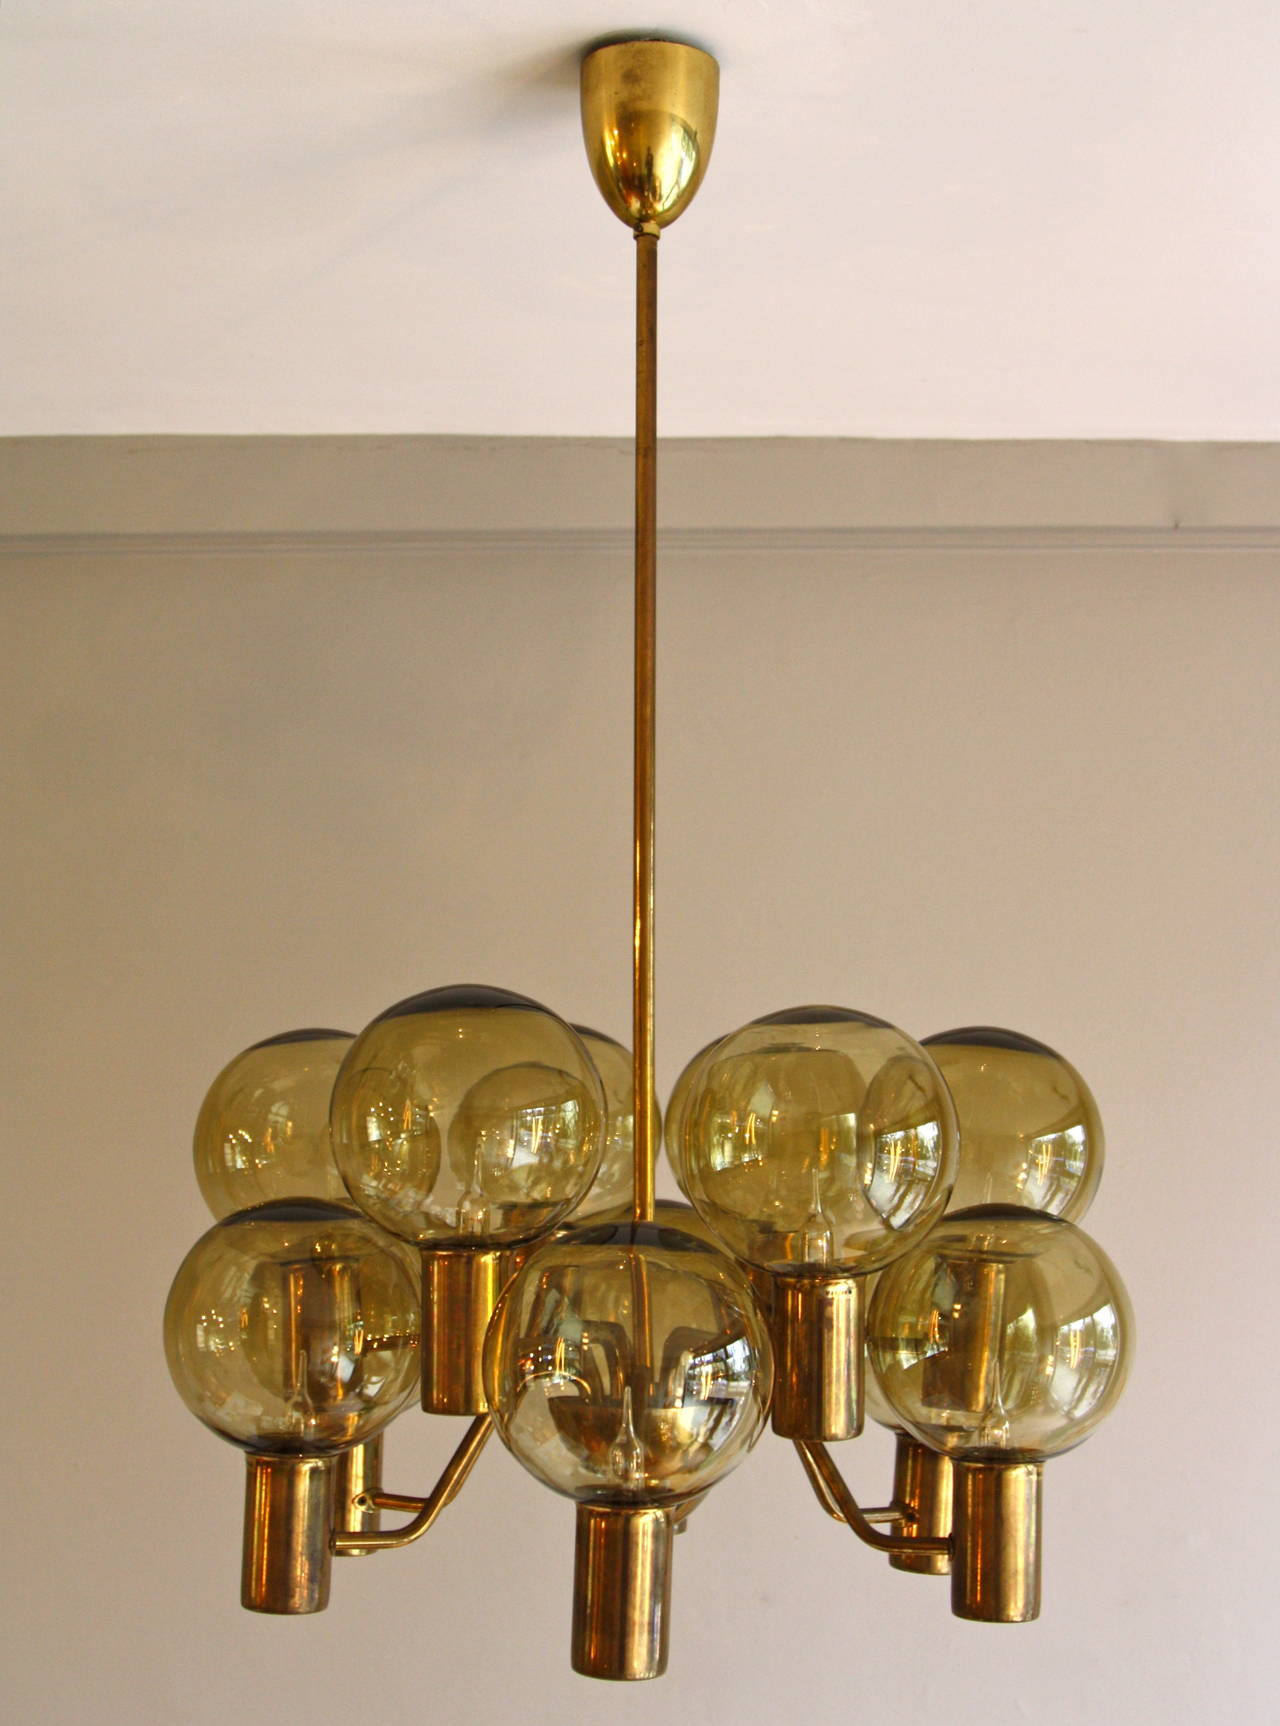 Beautiful twelve armed chandelier in brass with smoked glass globes.